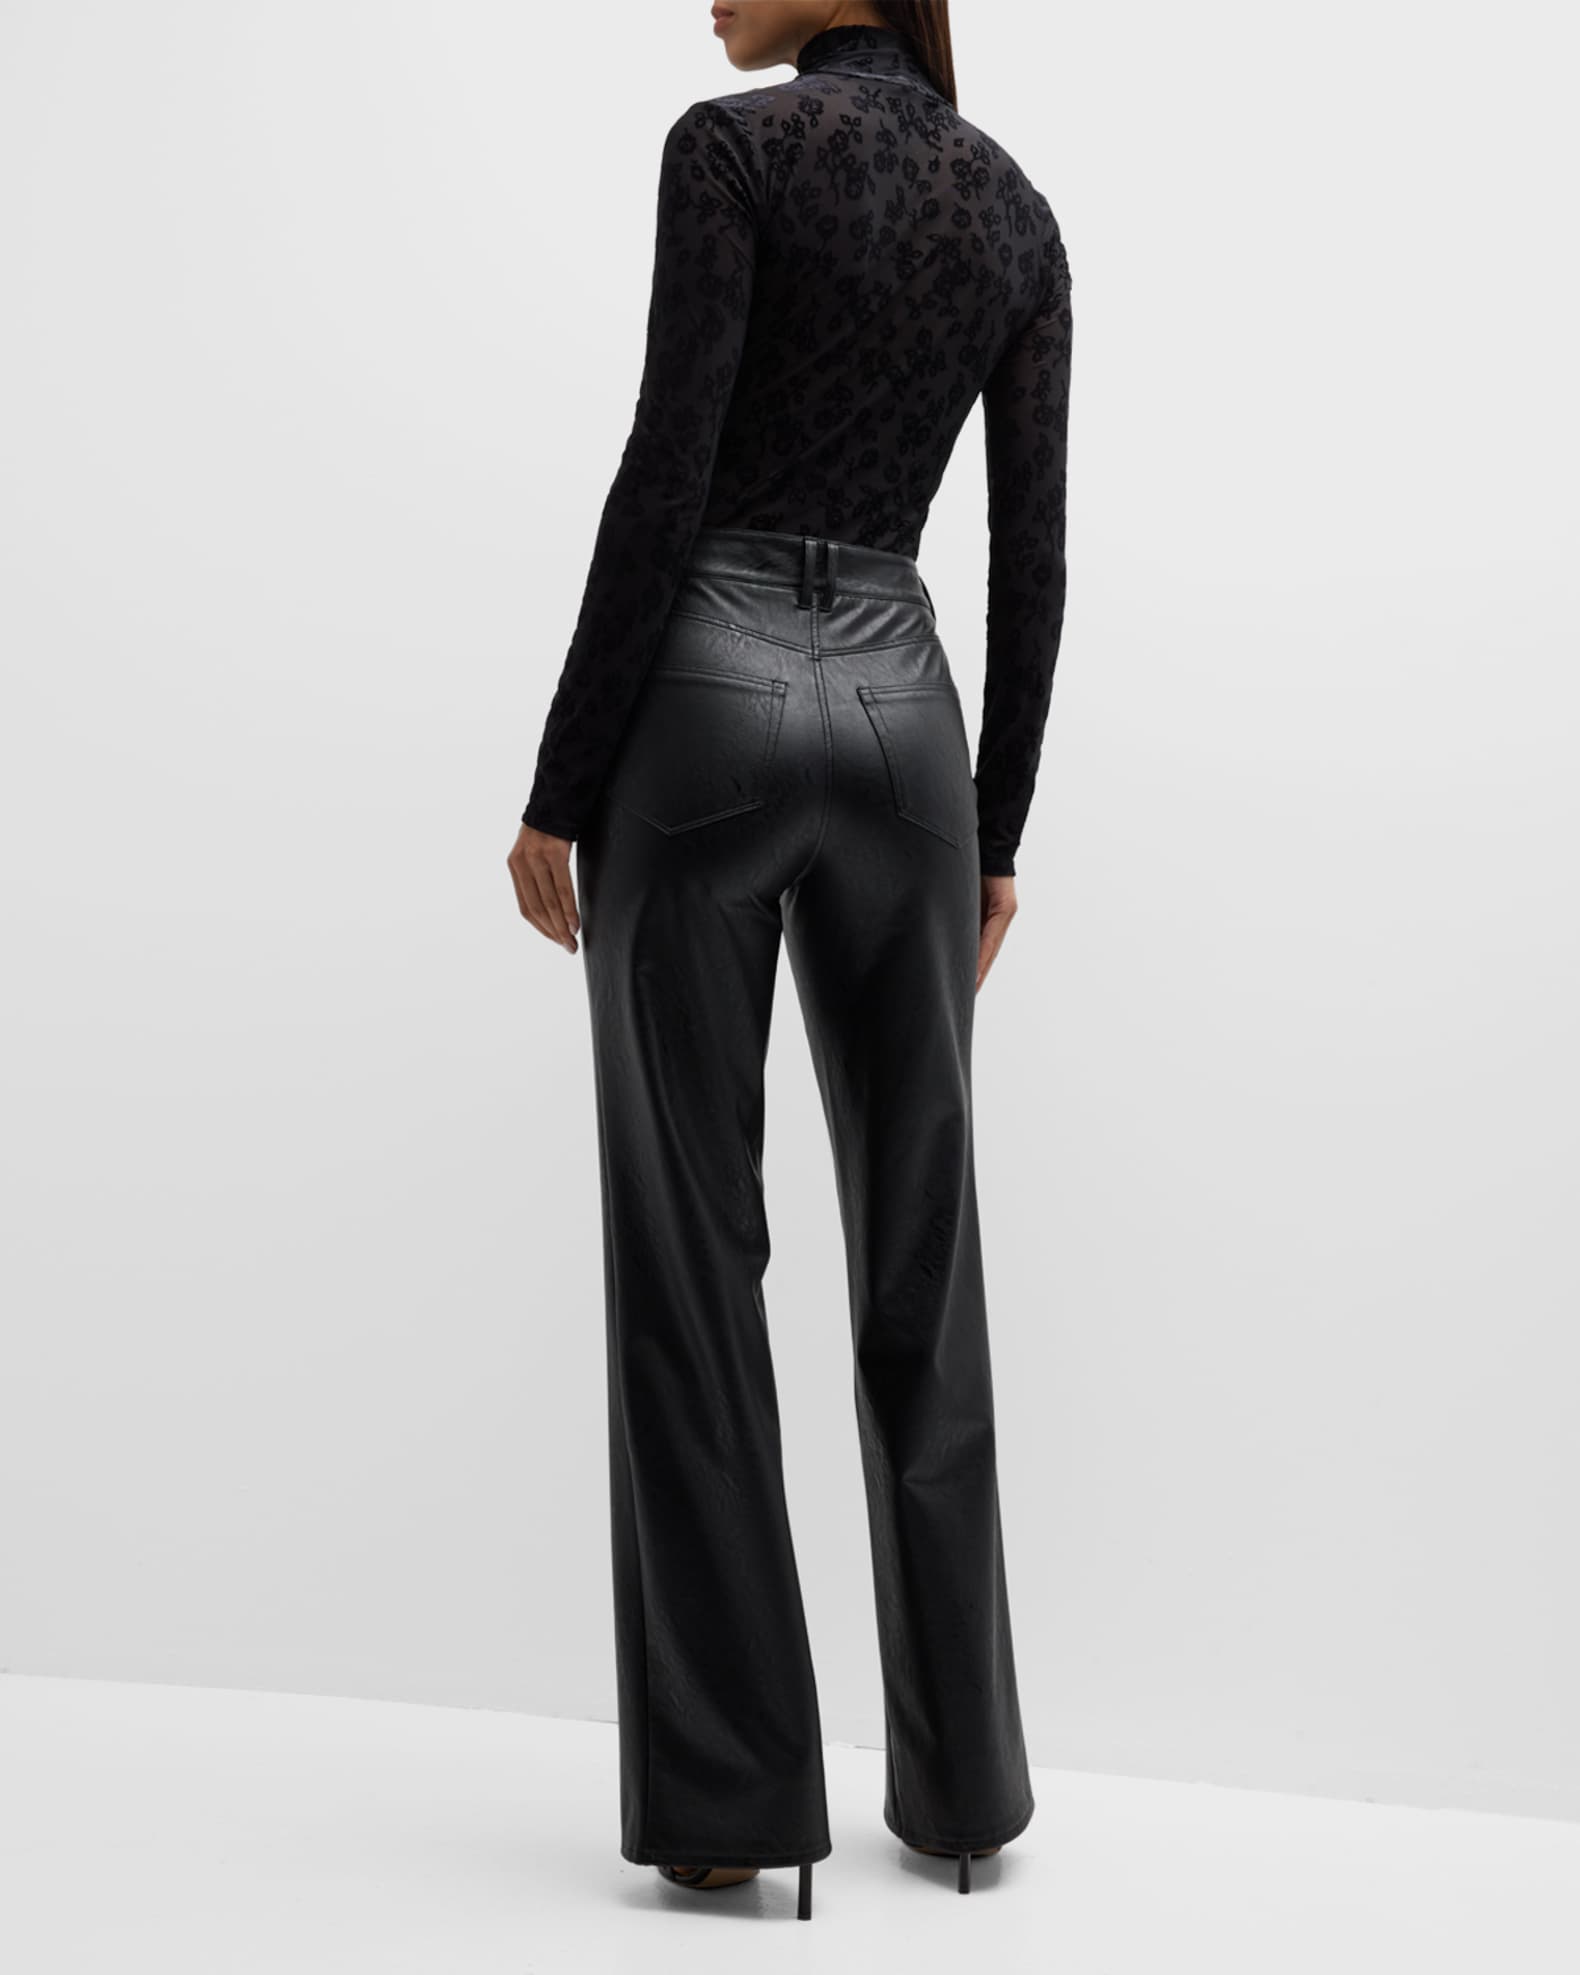 She's Going Places High Waisted Faux Leather Pants – MAELLEANDBLOOM